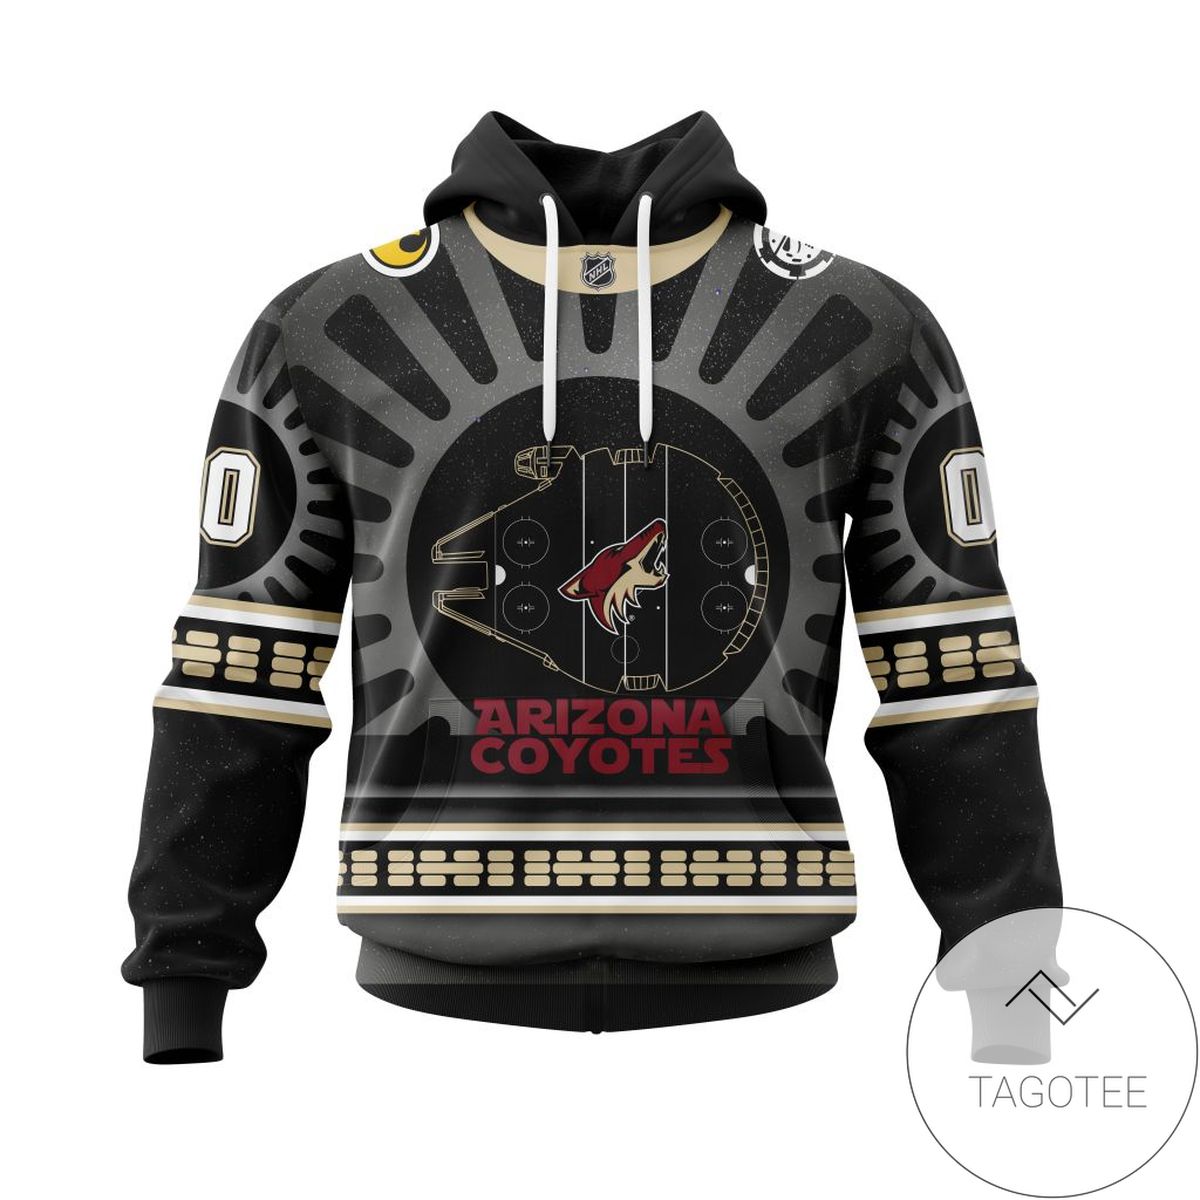 NHL Arizona Coyotes Star Wars May The 4th Be With You Black Version Personalized Jersey Hoodie T-shirt Jacket